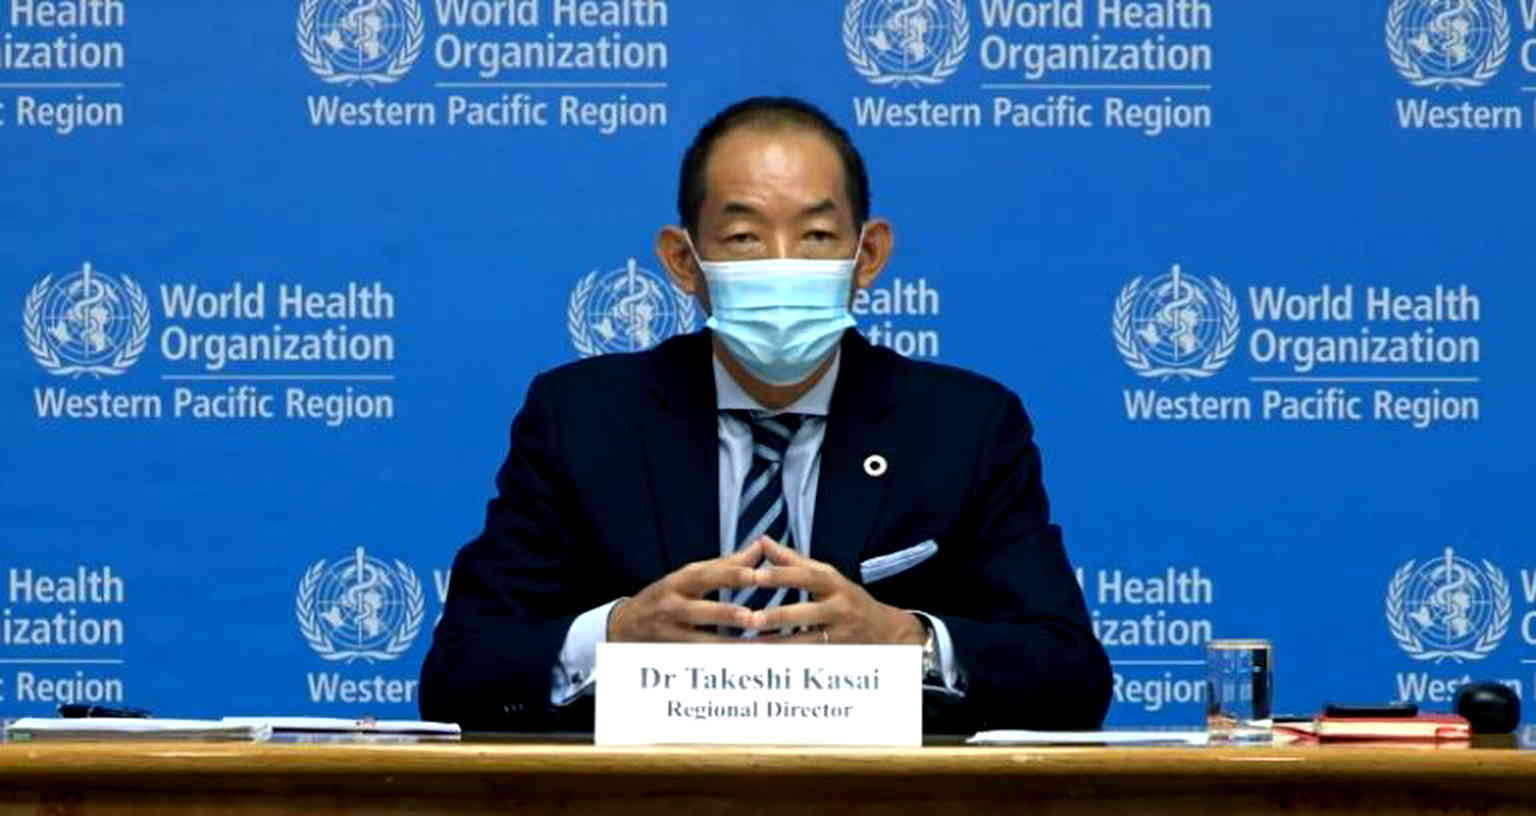 ‘I have been hard on staff’: WHO Asia chief accused of abuse and racism, secretly sharing data with Japan